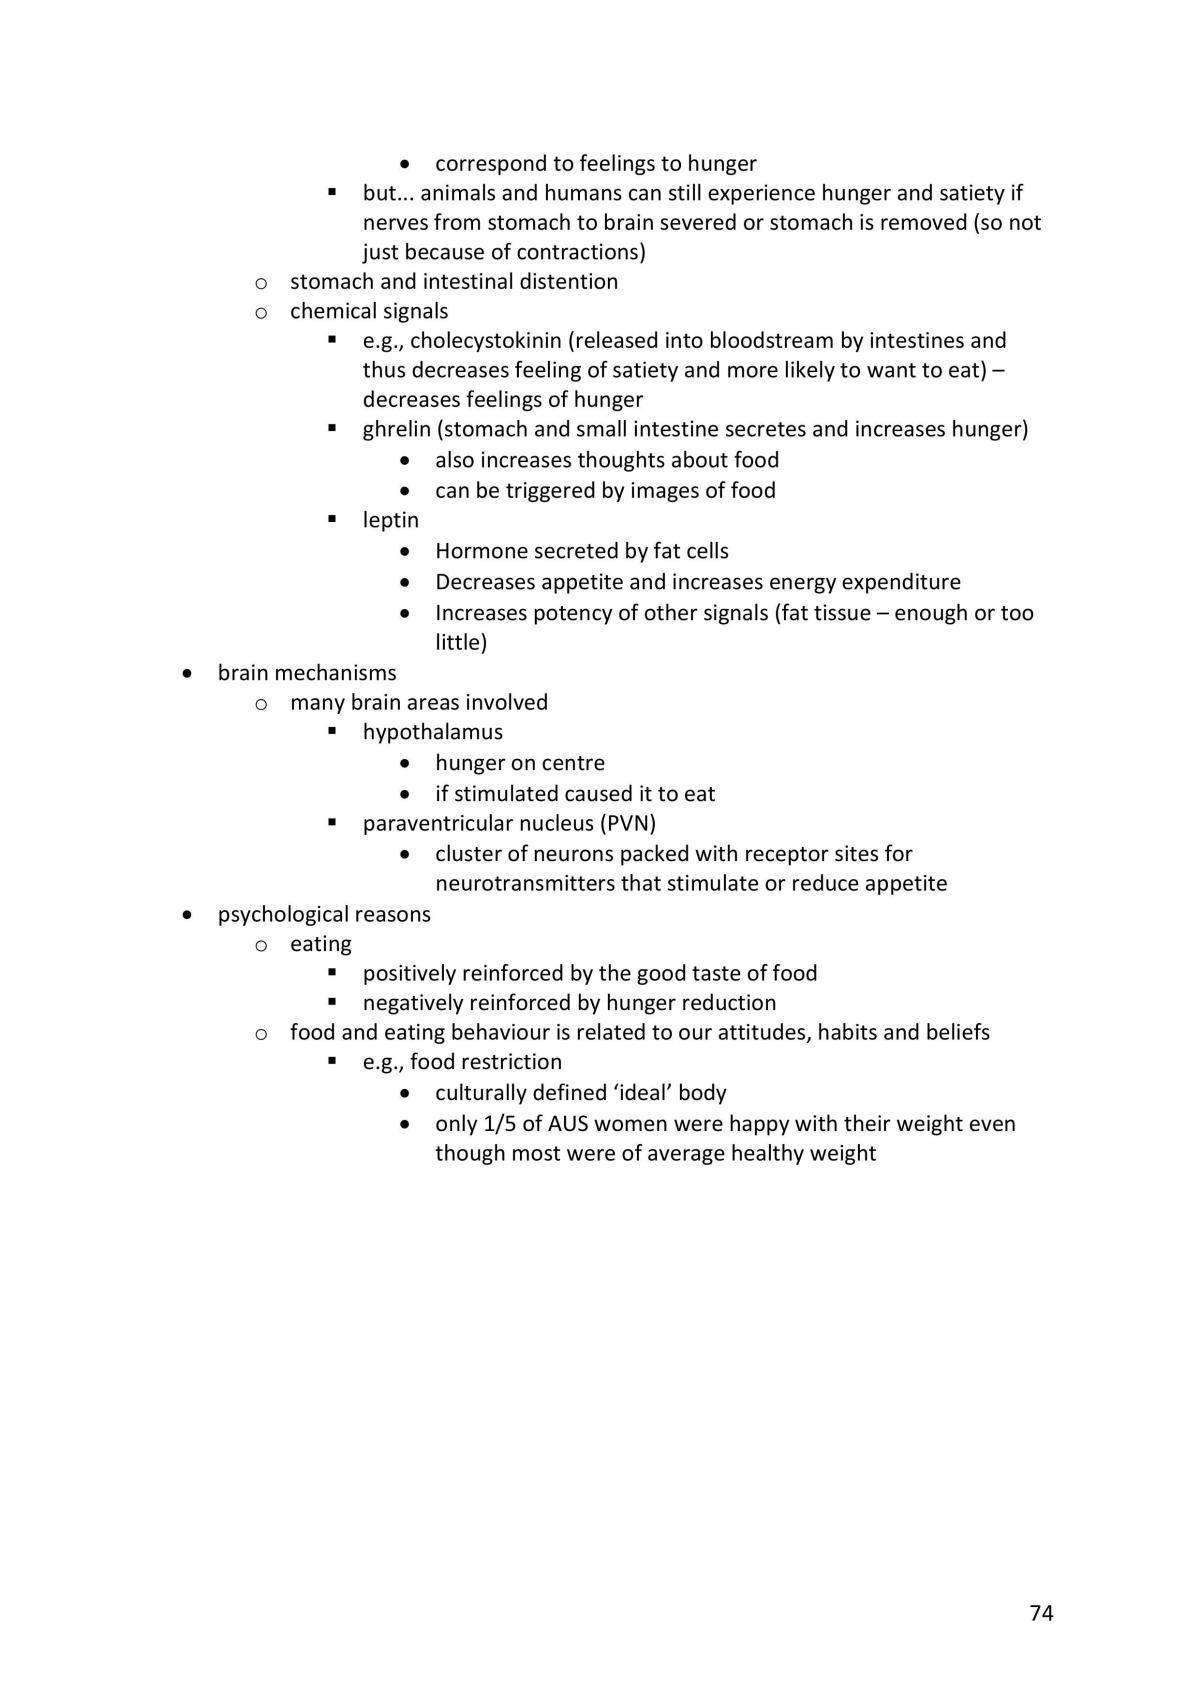 PSYC1101 All Notes - Page 74